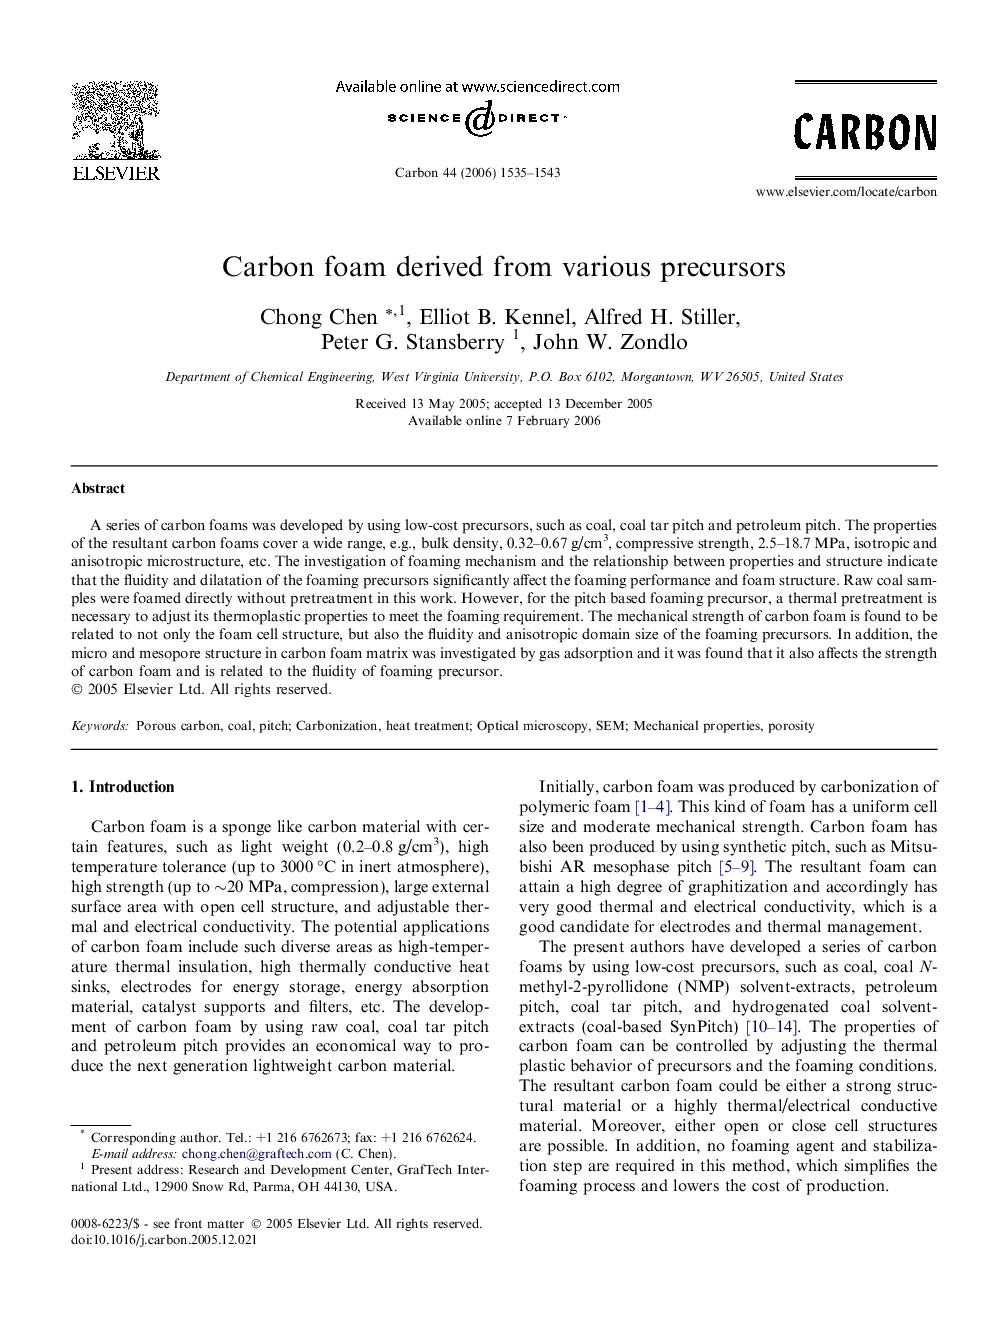 Carbon foam derived from various precursors